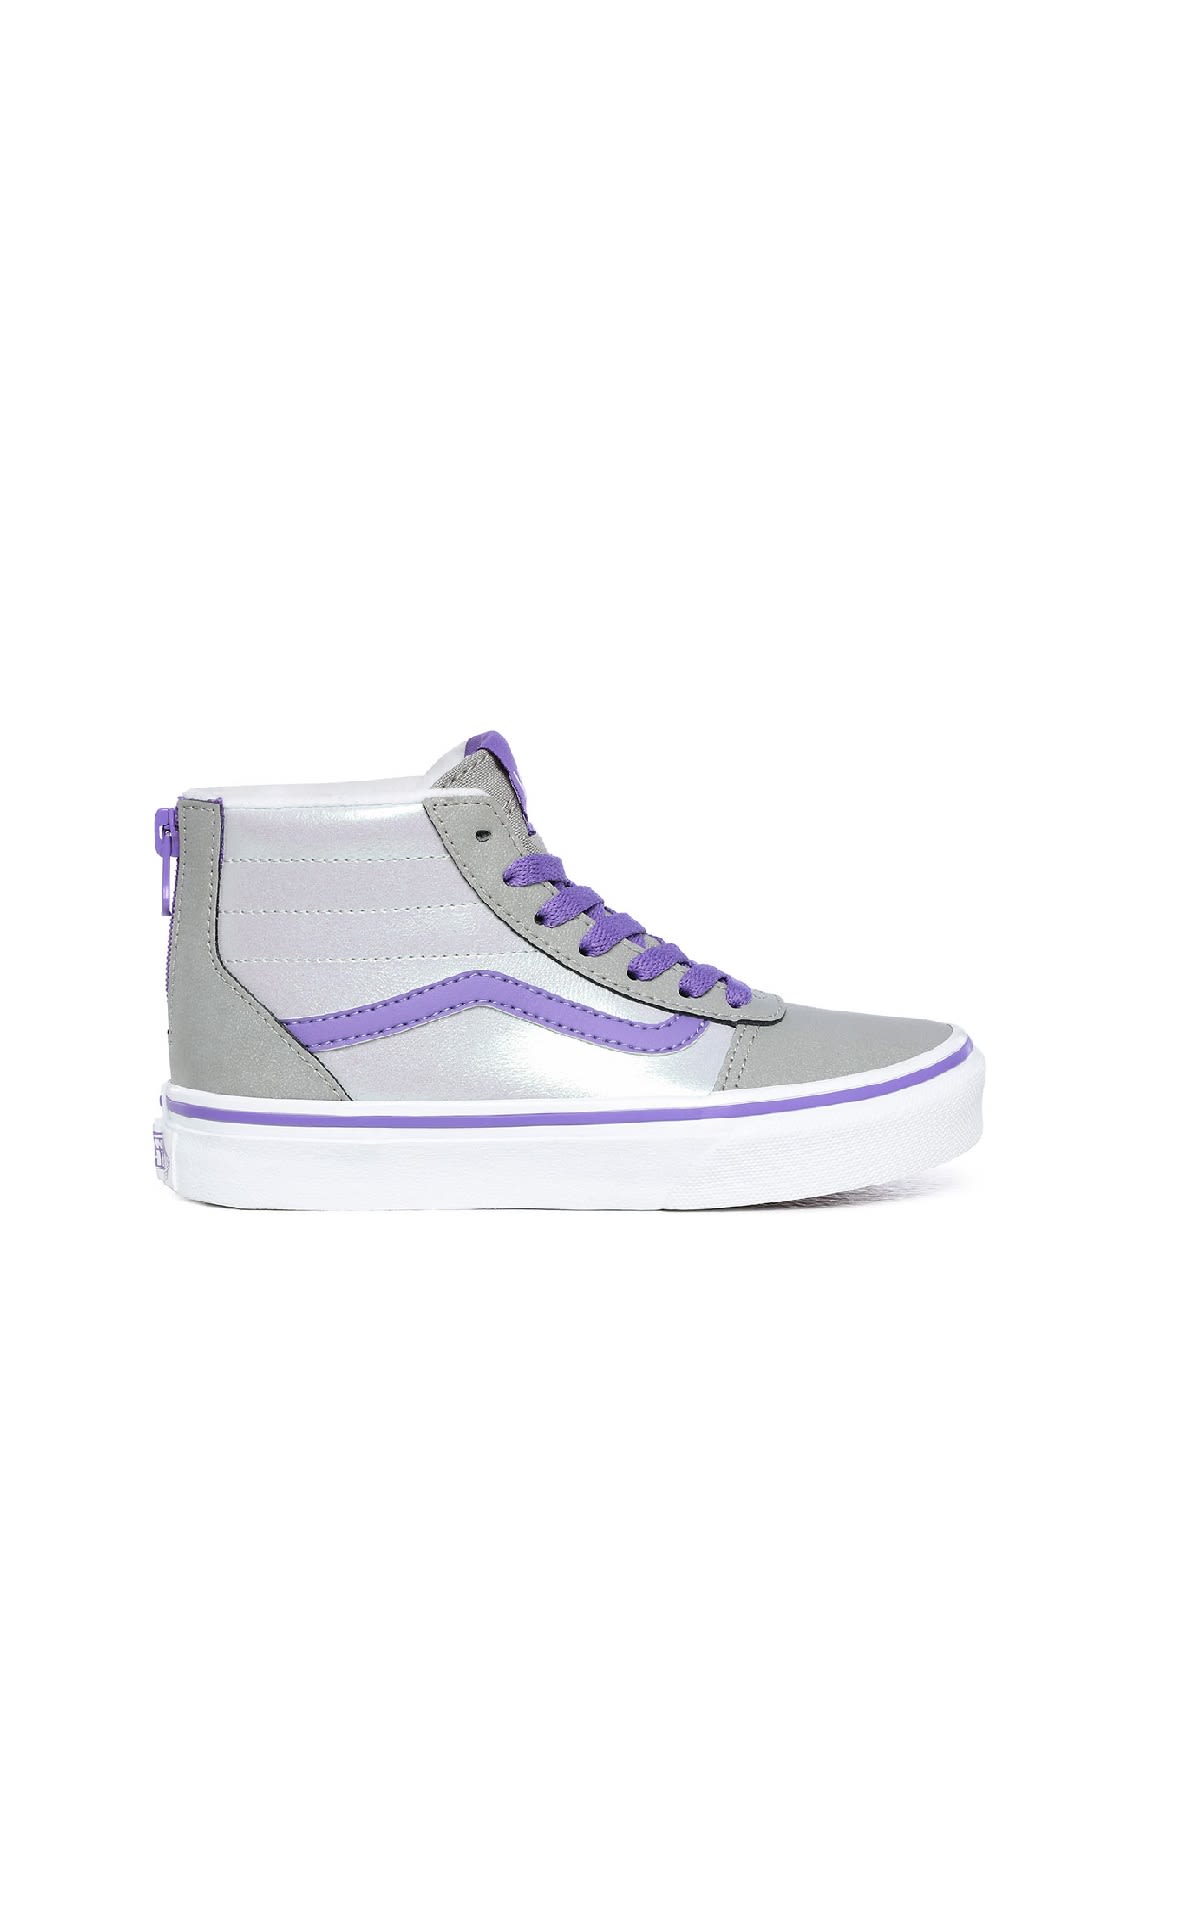 White, gray and lilac mid-ankle sneakers Vans